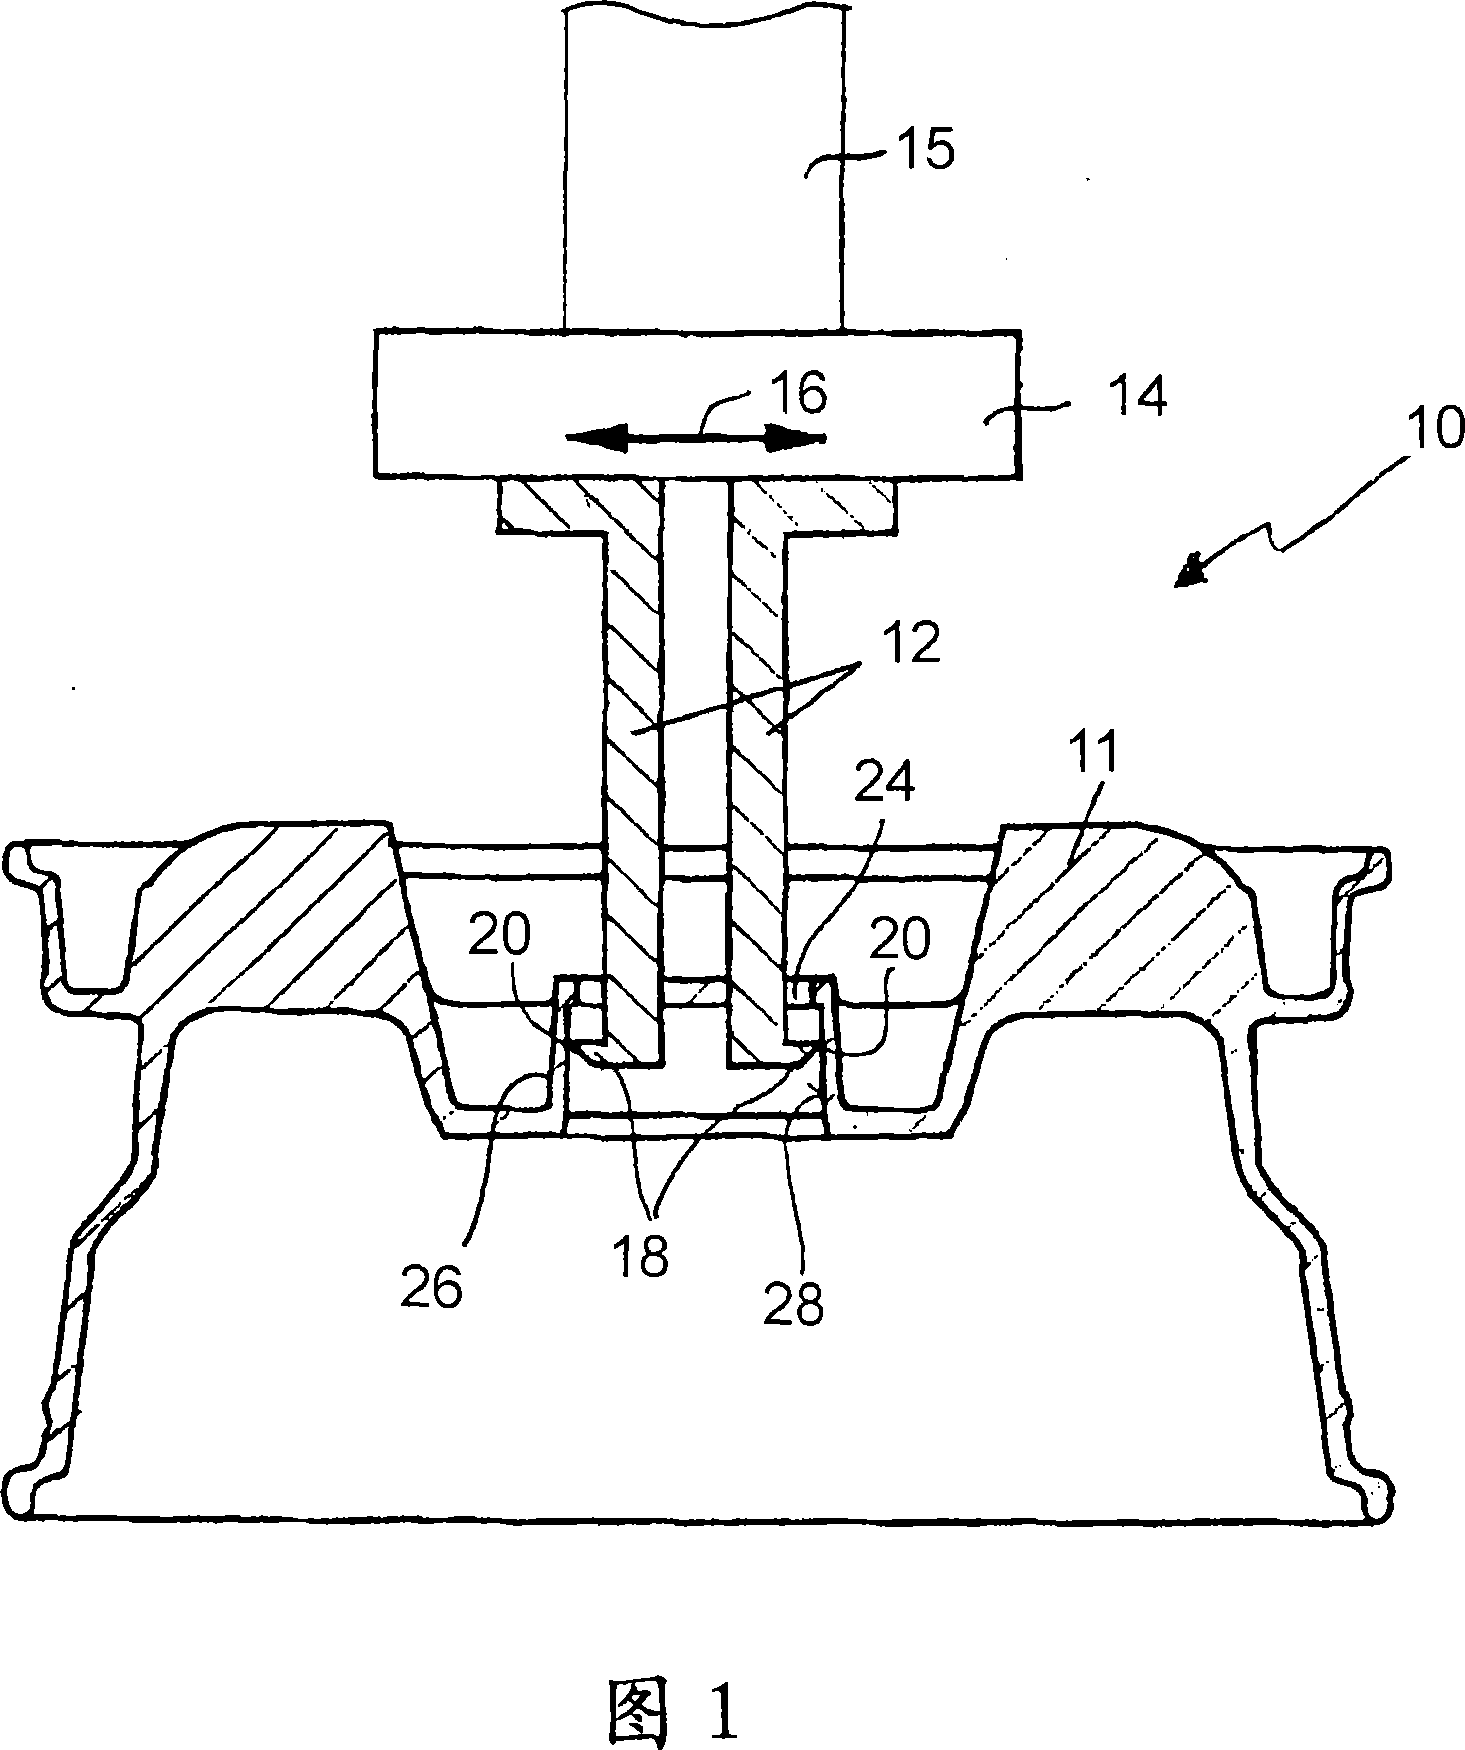 Handling device for handling a motor vehicle rim in a surface treatment installation